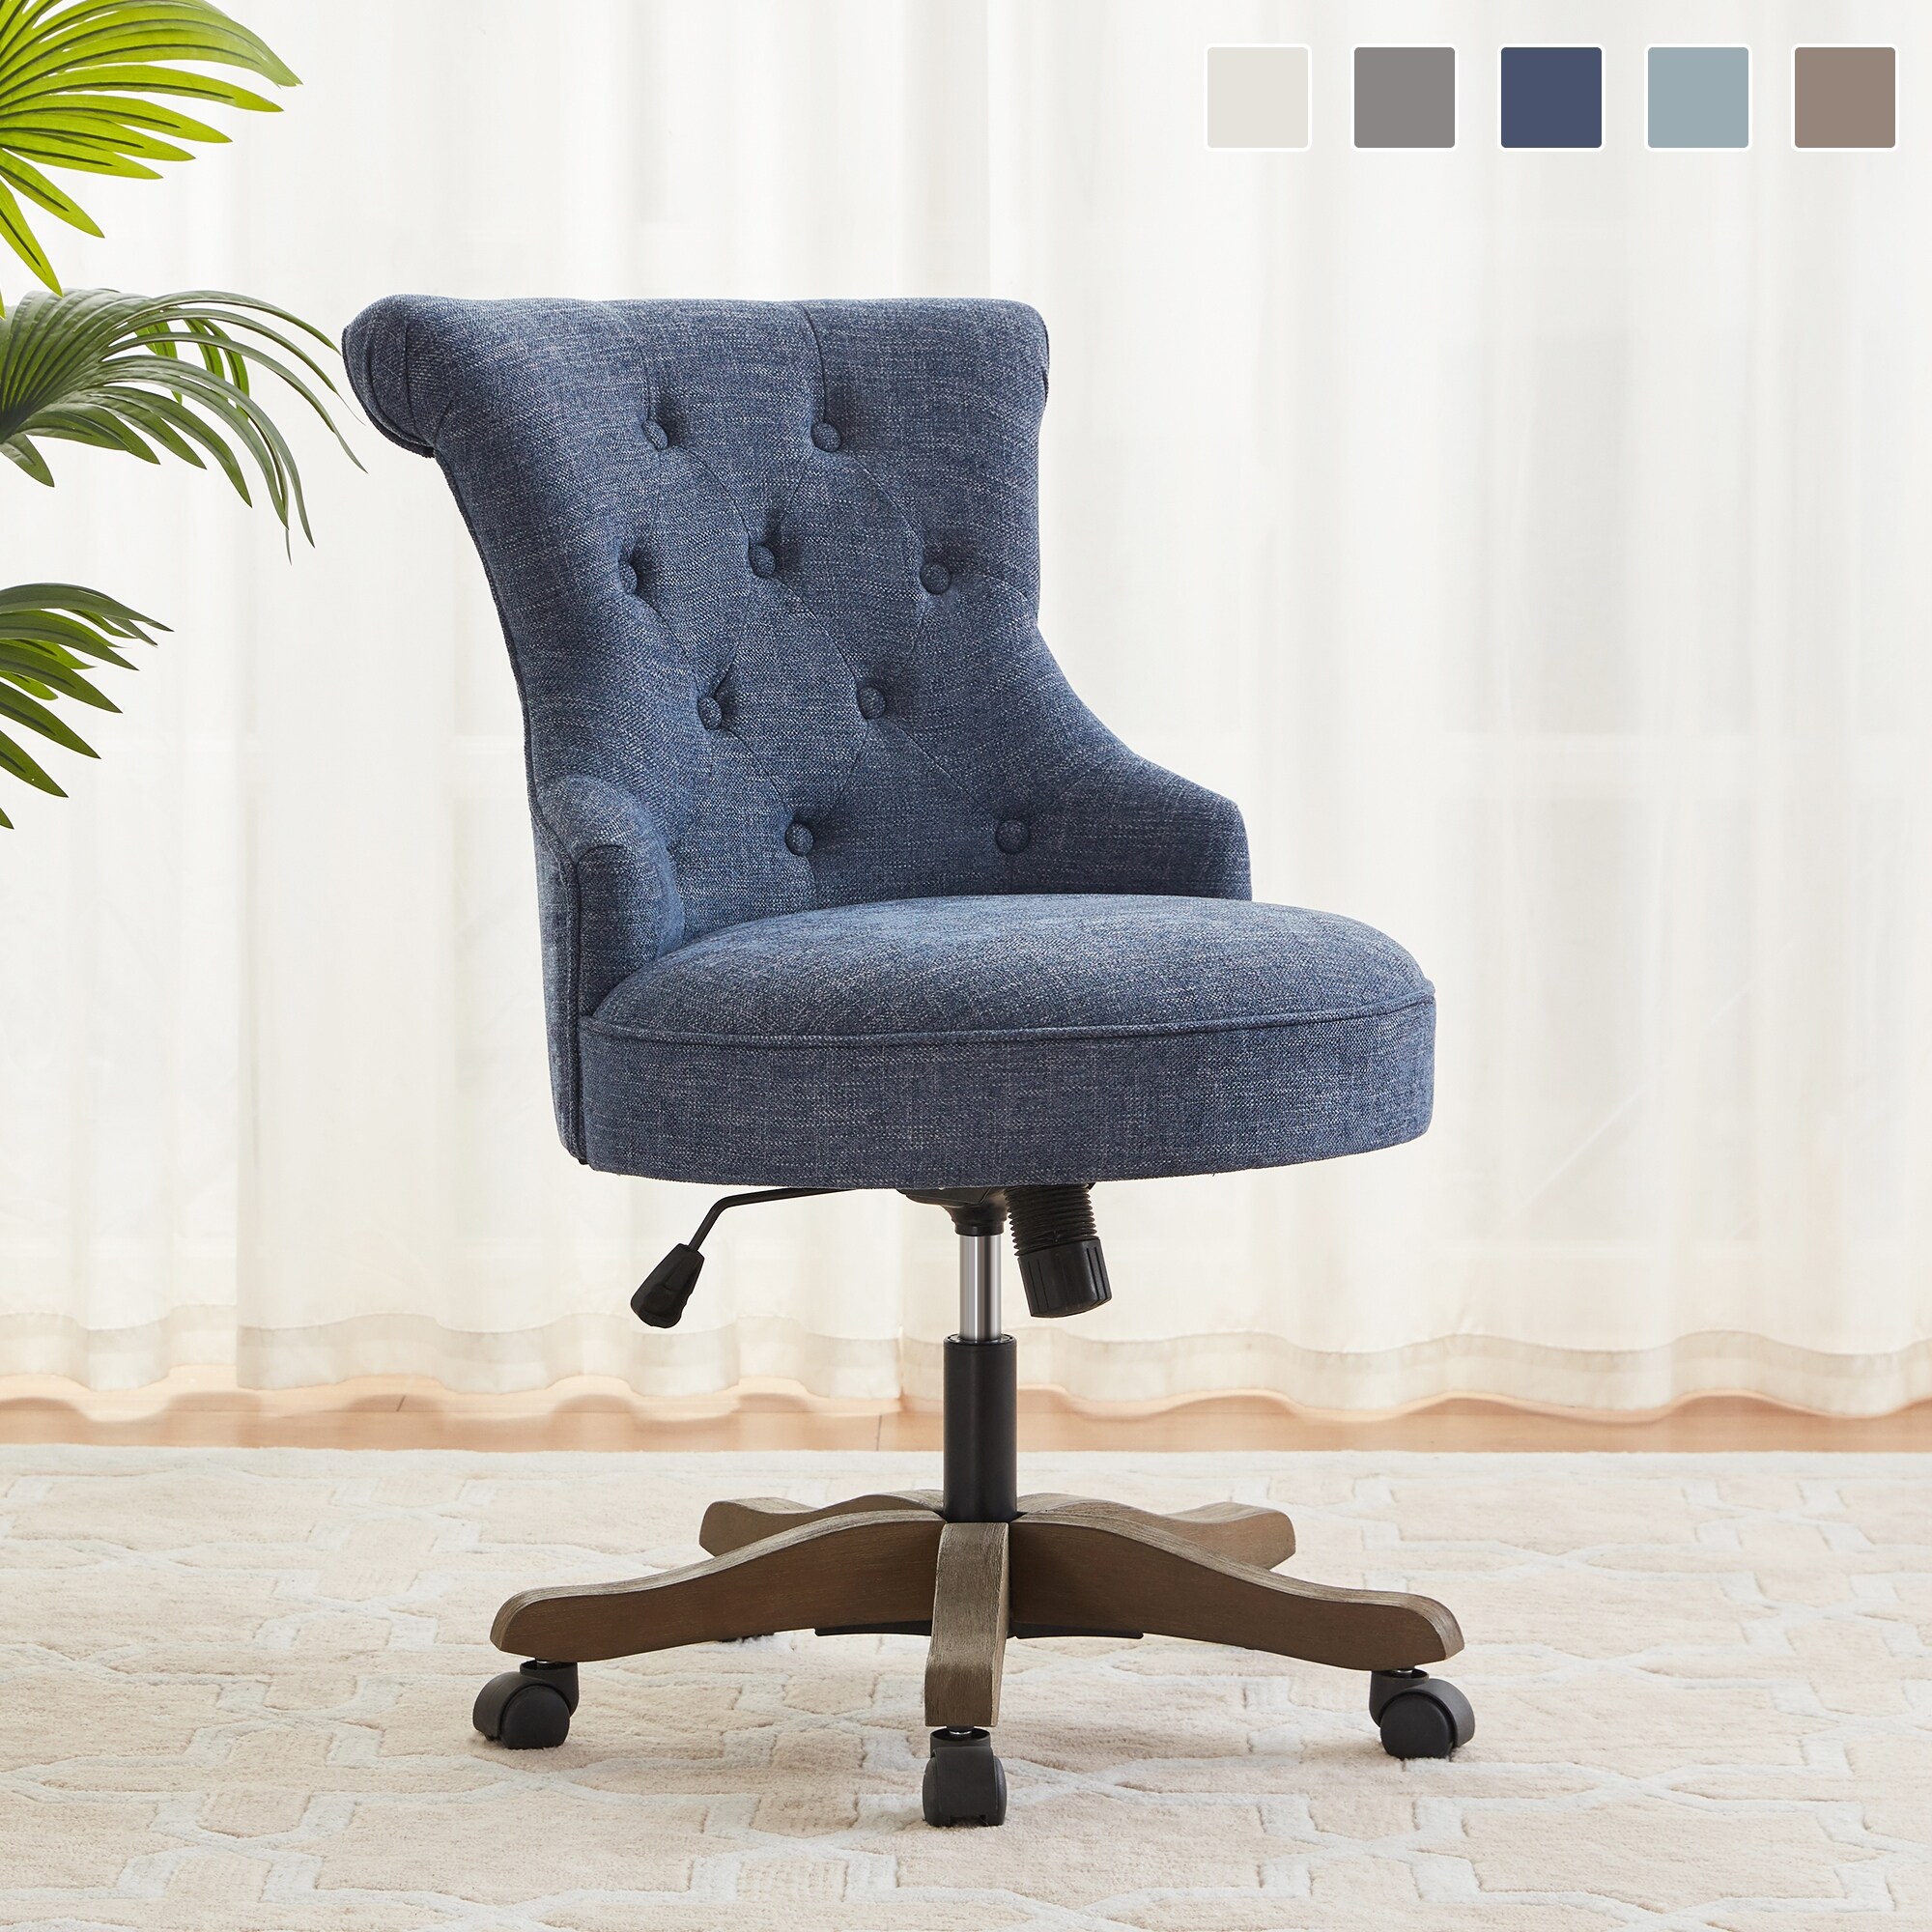 https://ak1.ostkcdn.com/images/products/is/images/direct/62aec900c97908ebdabb3cdde303d25b7f2caf4a/HUIMO-Office-Chair-with-Wheels-Beige--Blue--Grey-Adjustable-Height%2C-Linen-Fabric-Upholstered-Computer-Desk-Chair-Swivel.jpg